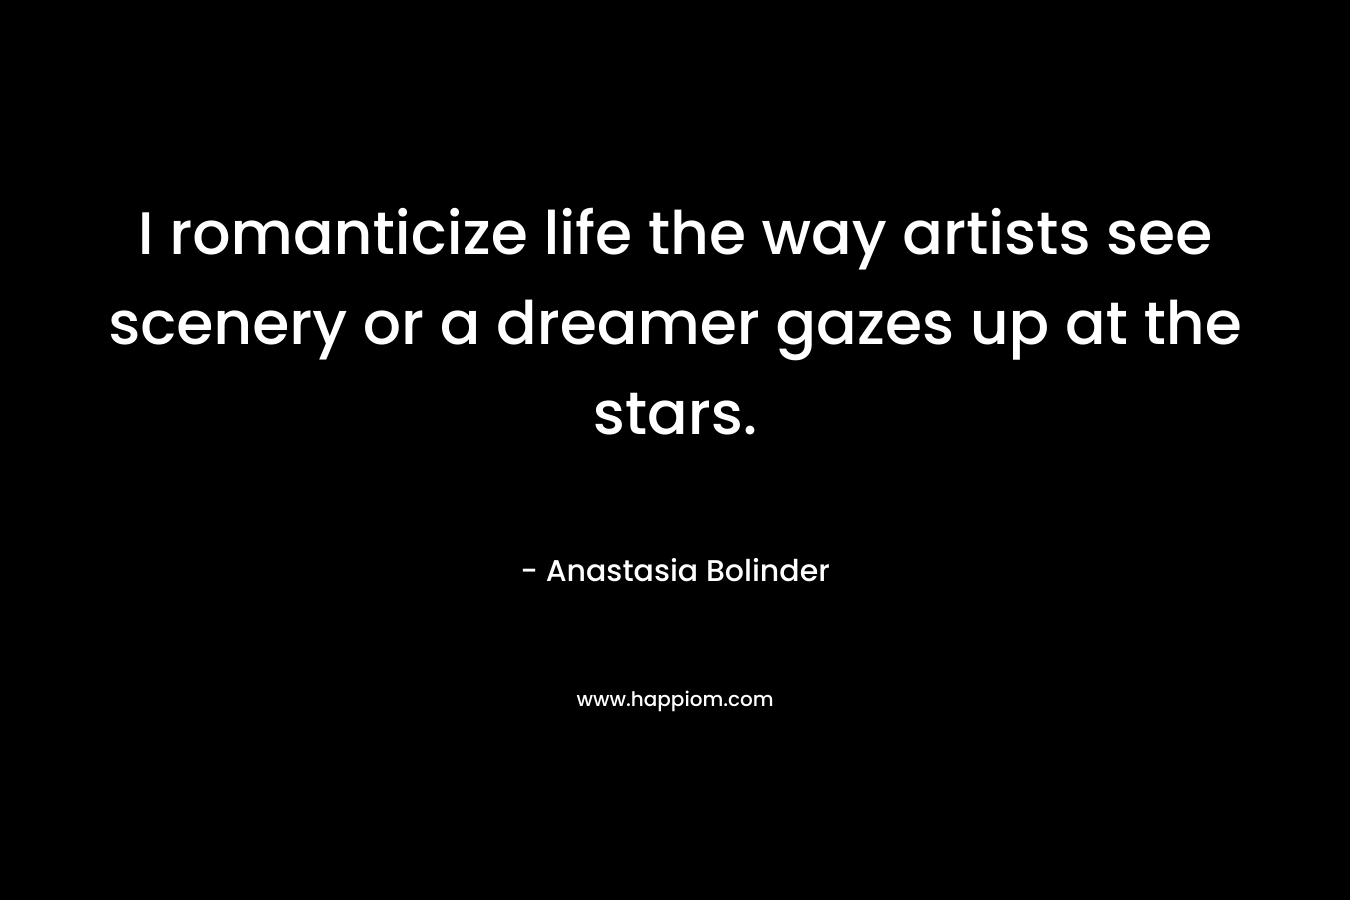 I romanticize life the way artists see scenery or a dreamer gazes up at the stars. – Anastasia Bolinder